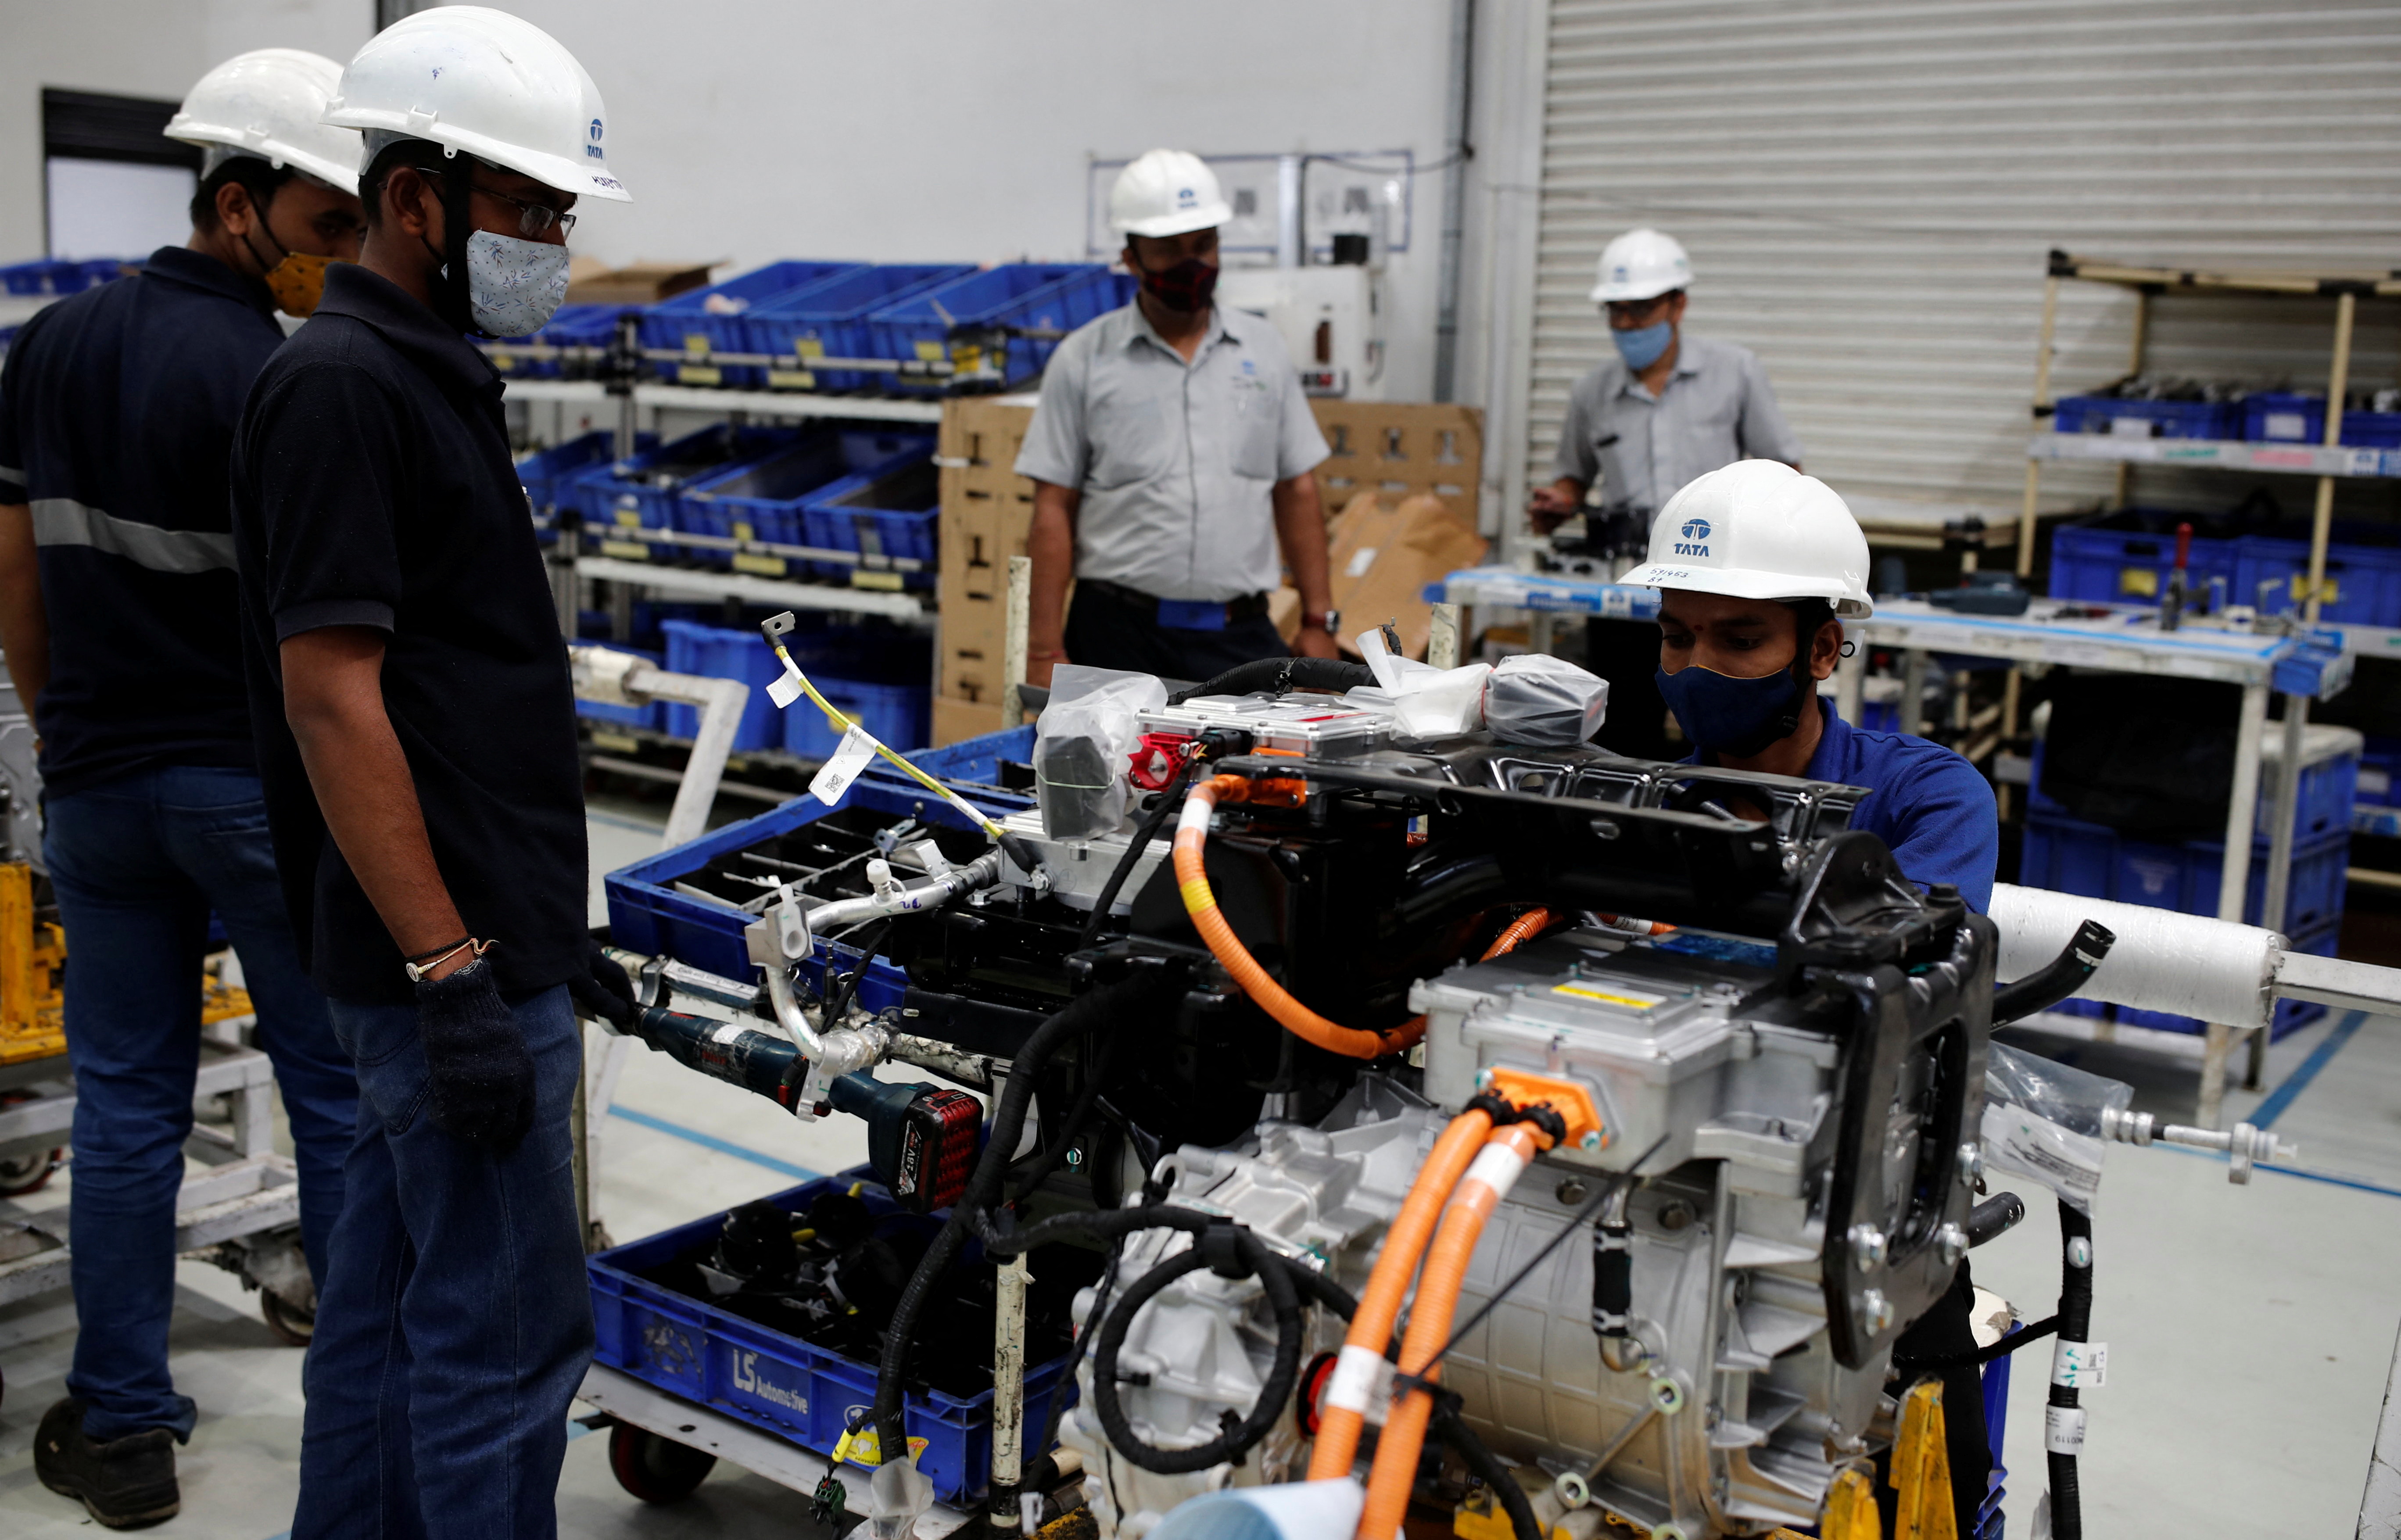 A worker inspects the electric motor before installation inside a Tata Nexon electric sport utility vehicle (SUV)  at the Tata Motors plant in Pune